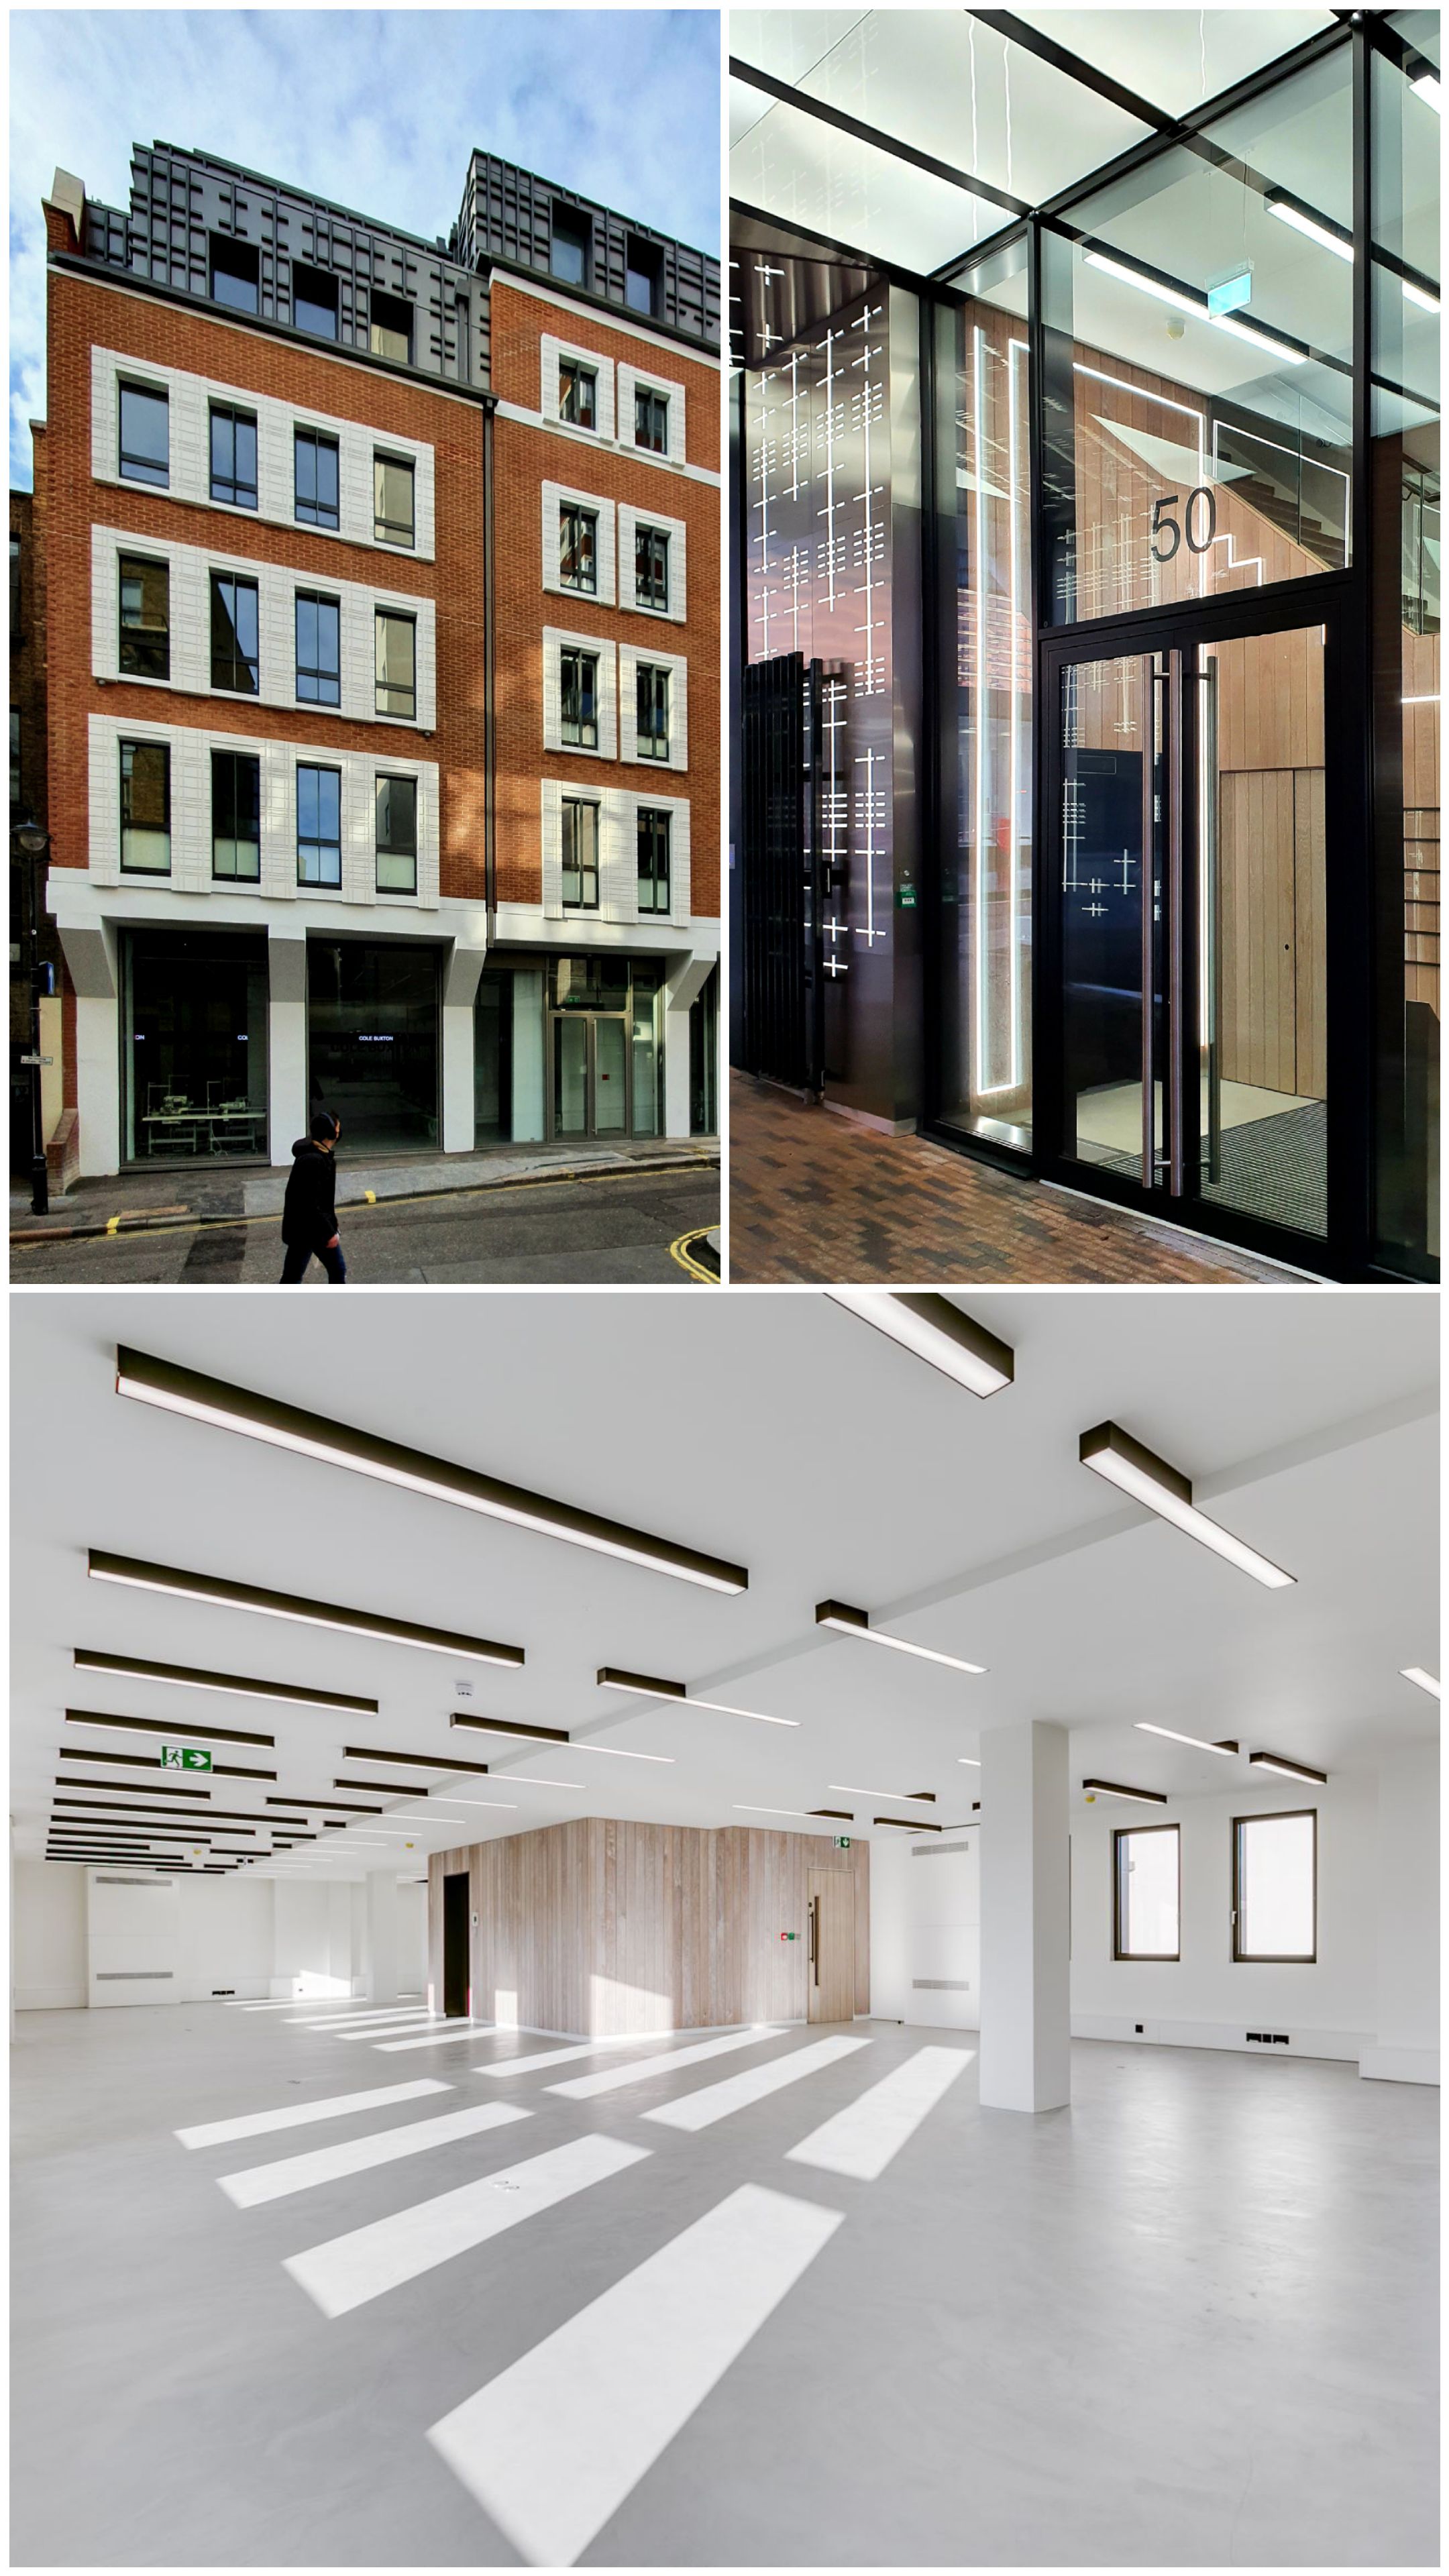 50 Marshall Street, Soho offices completed